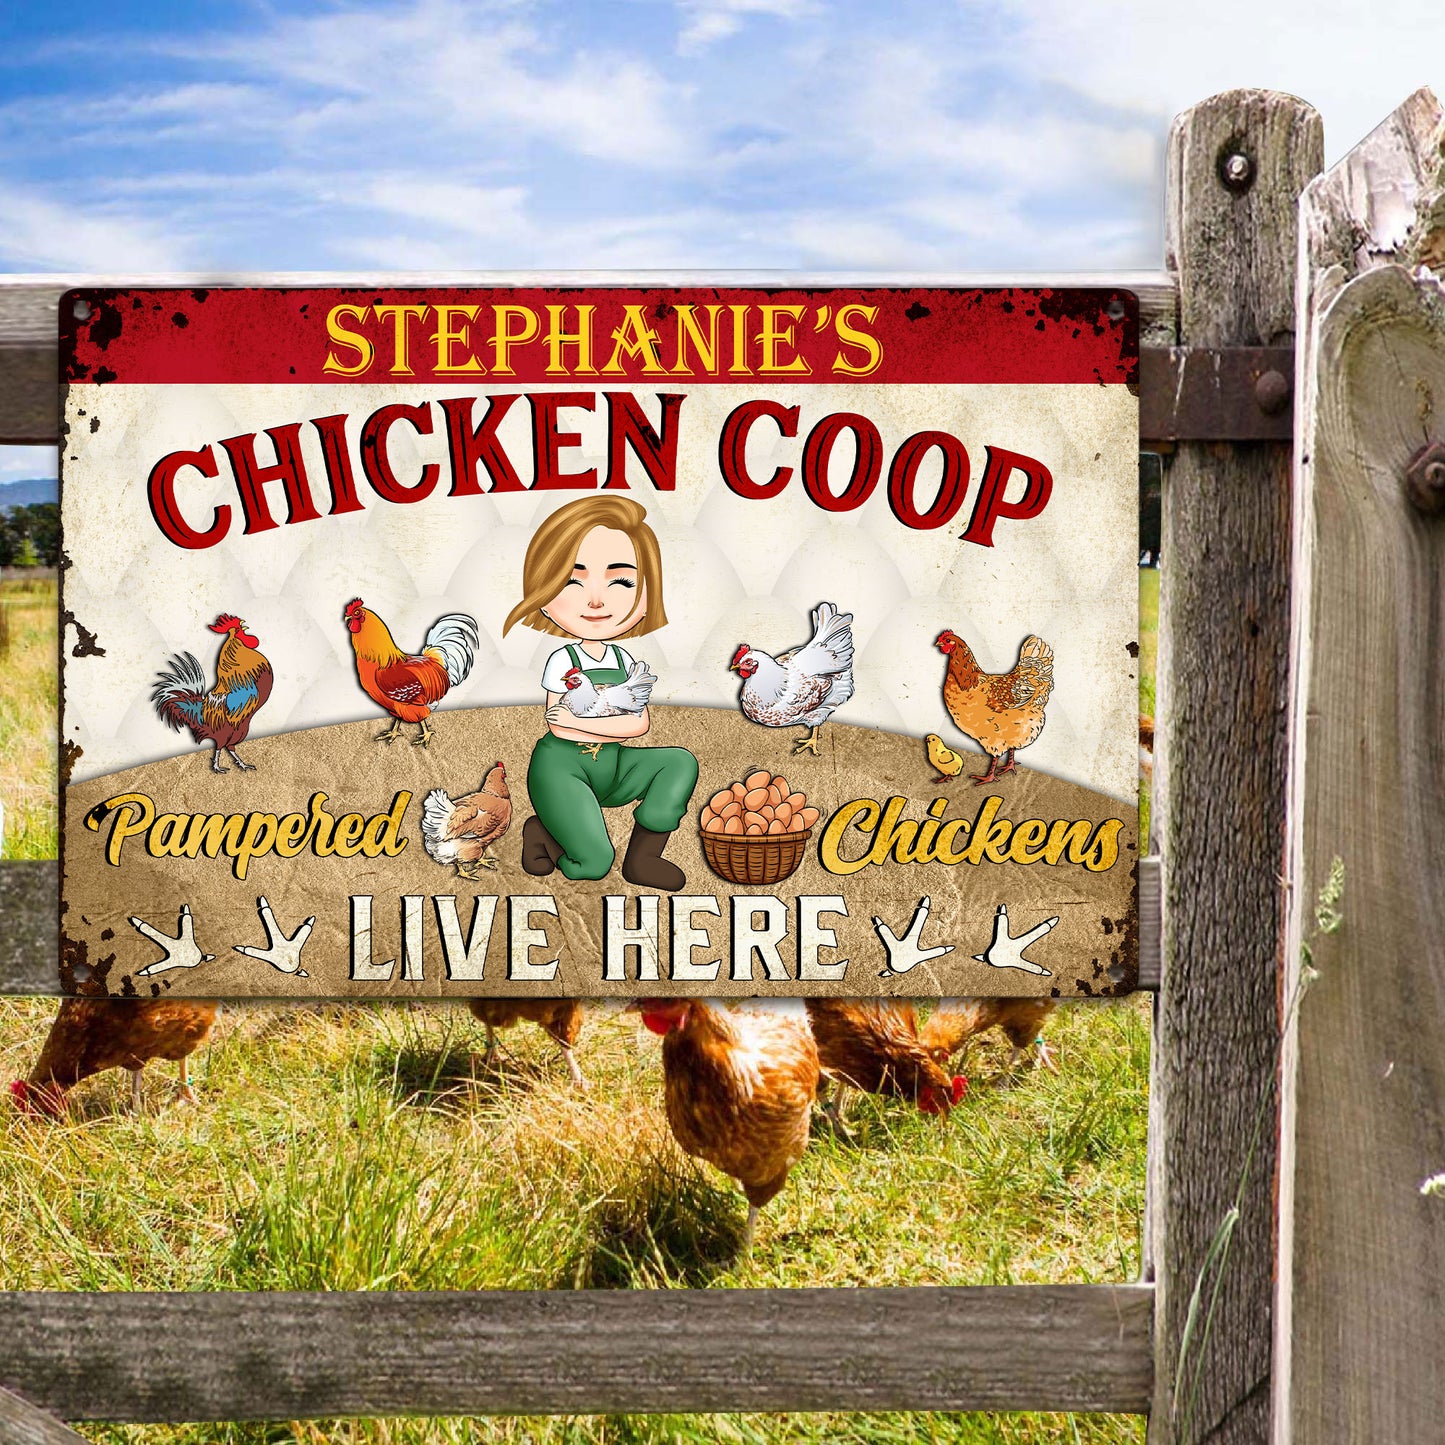 Pampered Chickens Live Here - Personalized Metal Sign - Chicken Coop Decoration, Funny Chicken, Farmhouse Decorations Gift For Chicken Lovers, Farmer